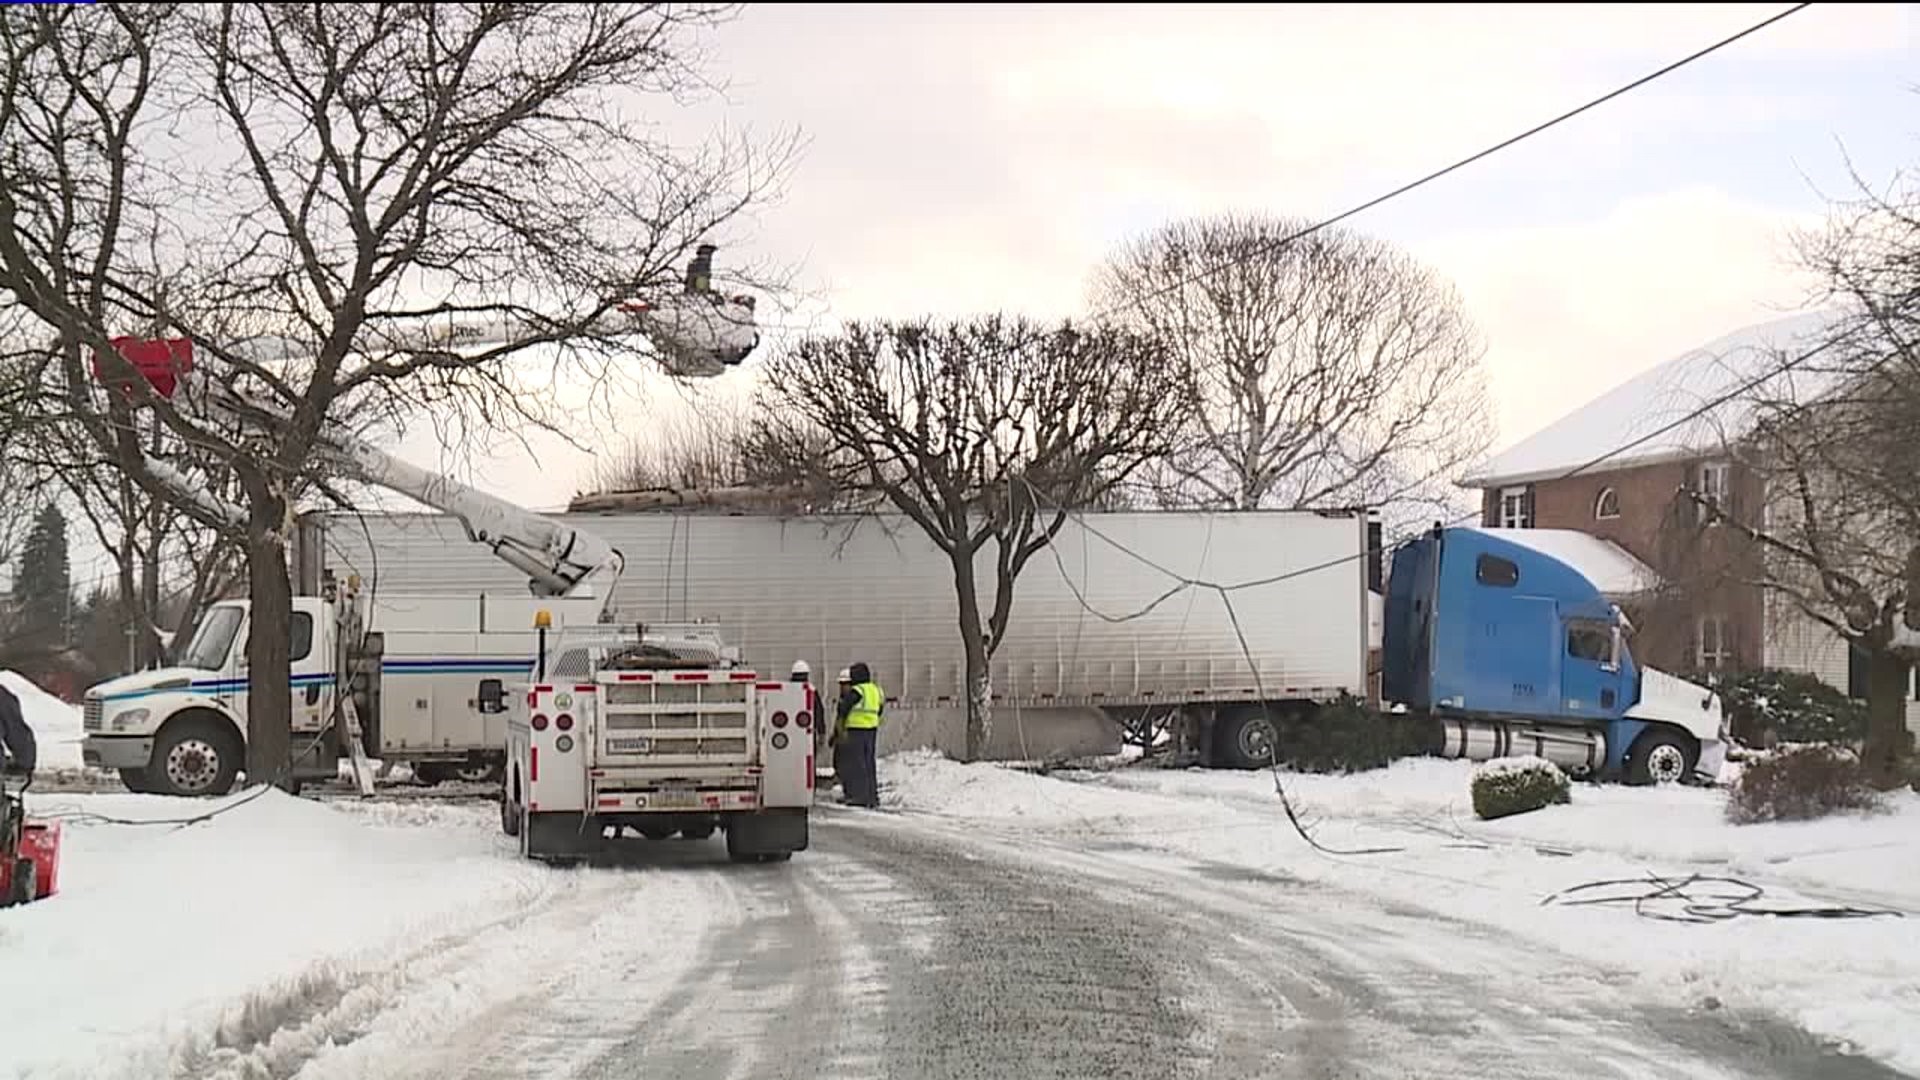 Icy Roads Blamed After Truck Hits Utility Pole